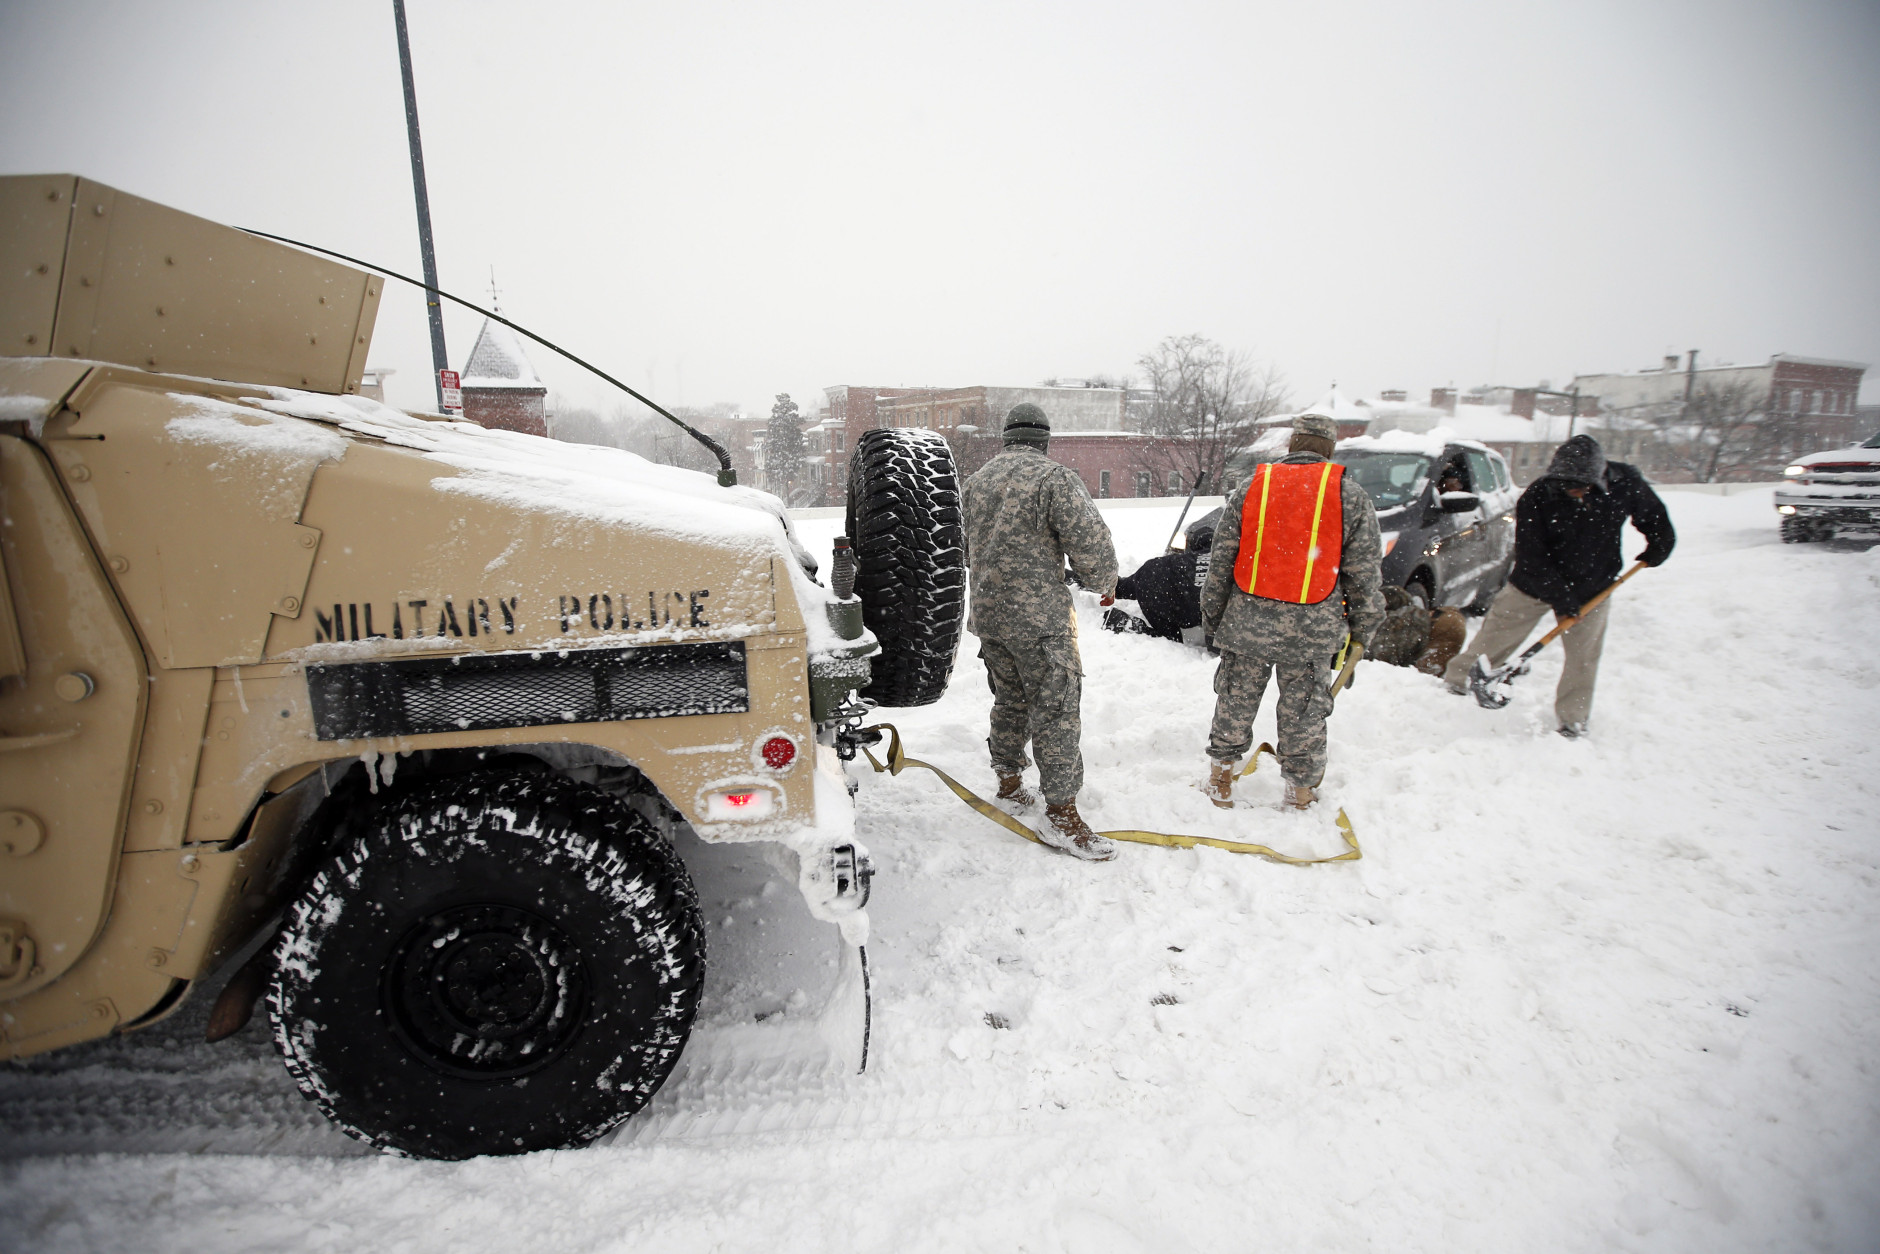 Soldiers with the 275th Military Police company, and a Washington Firefighter, in a Humvee, assist a stranded motorist in the snow on I-395, Saturday, Jan. 23, 2016 in Washington. (AP Photo/Alex Brandon)